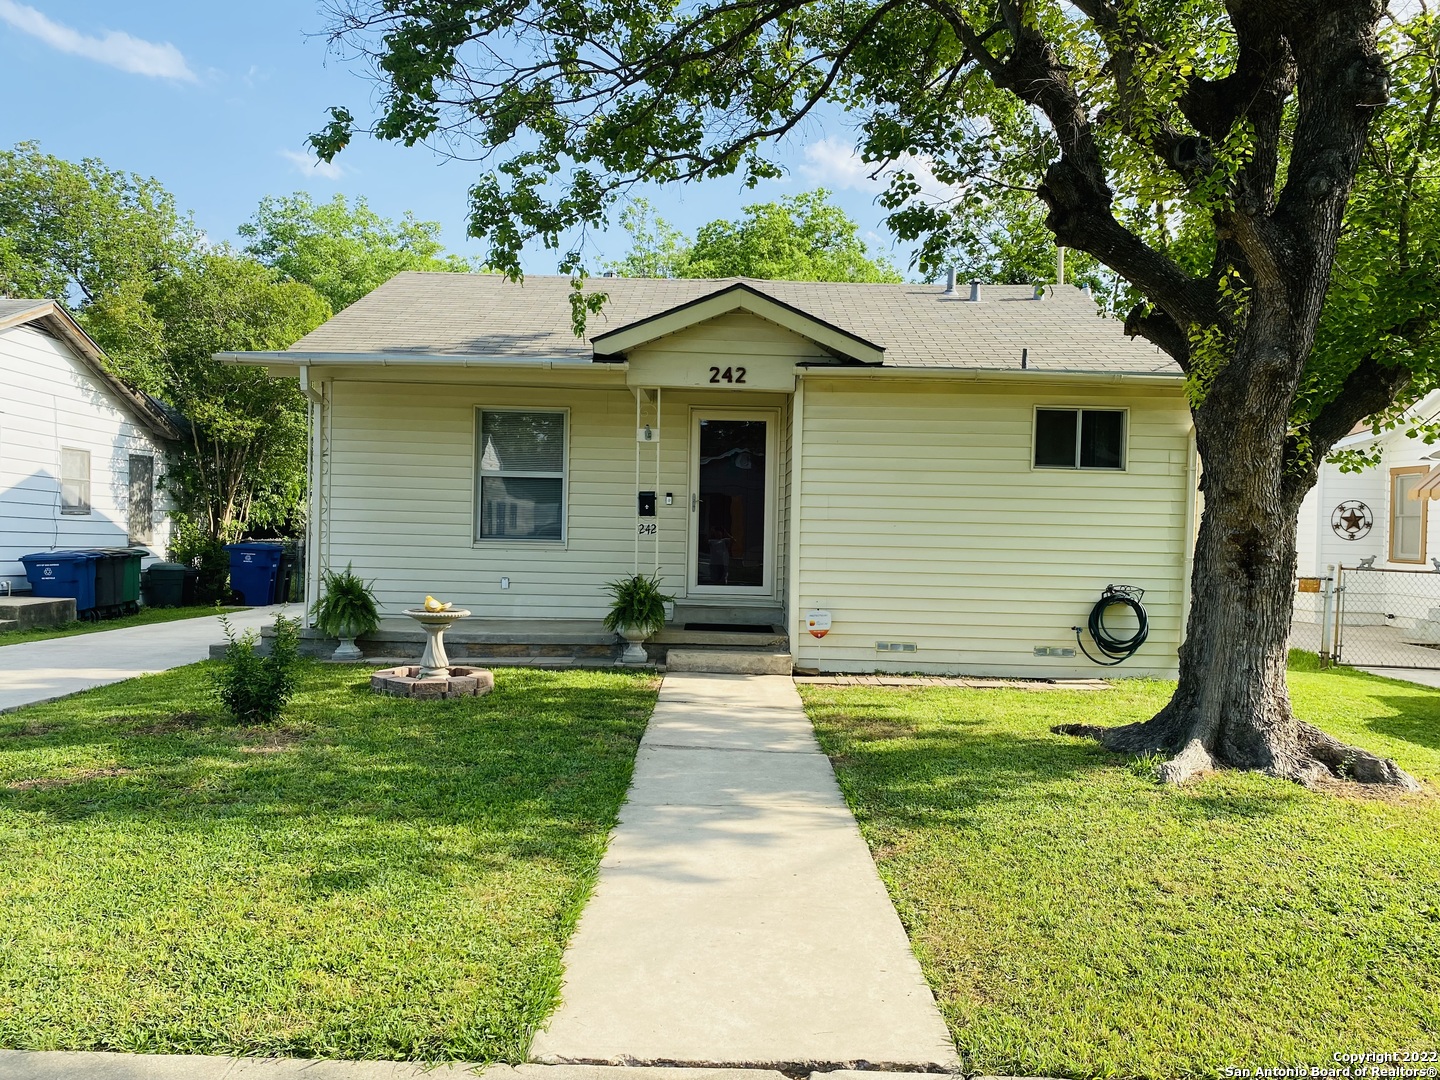 LOOK NO FURTHER!!!  This is the house you would want to call HOME!  This home is located in a well-establish neighborhood.  It is located approx 5 mins away from King William, Southtown, Blue Star, Riverwalk and downtown.   The Sellers recently added a master bathroom and a washroom. Home is a 3/2, however can be used as a 2/2 with two living areas (see suggested floor plan attached) or a 4/2 (dining room can be used as a bedroom) Highlights of the home:  newly added master bathroom and washroom, insulation of home, 2019 roof, original wood floors, storm windows, lots of closet/storage space.   The backyard consists of lots of shade, plants and fruit trees.   MAKE AN APPOINTMENT TODAY BEFORE IT IS GONE!   Forgot to mention, it is walking distance to an HEB, LIBRARY AND PARK (tennis and basketball courts, pavilion and playground).